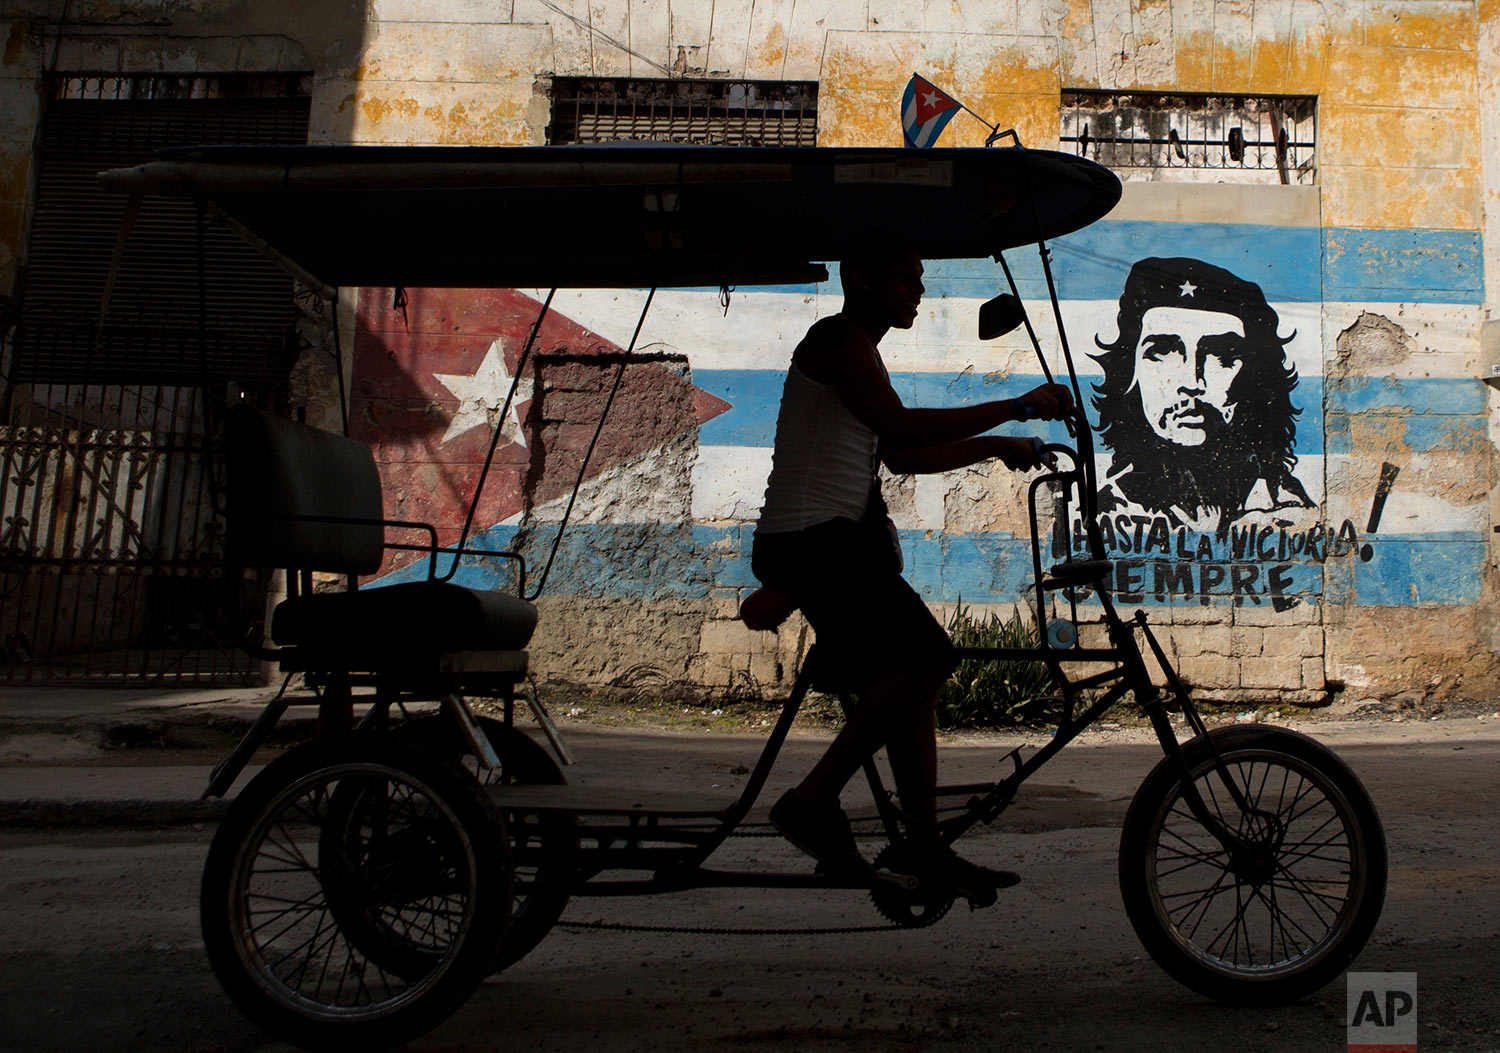  A bicycle taxi rides past a building painted with a Cuban flag and an image of Che Guevara, along with the Spanish slogan "Always toward victory!" in Havana, Cuba, Saturday, March 19, 2016. (AP Photo/Rebecca Blackwell) 